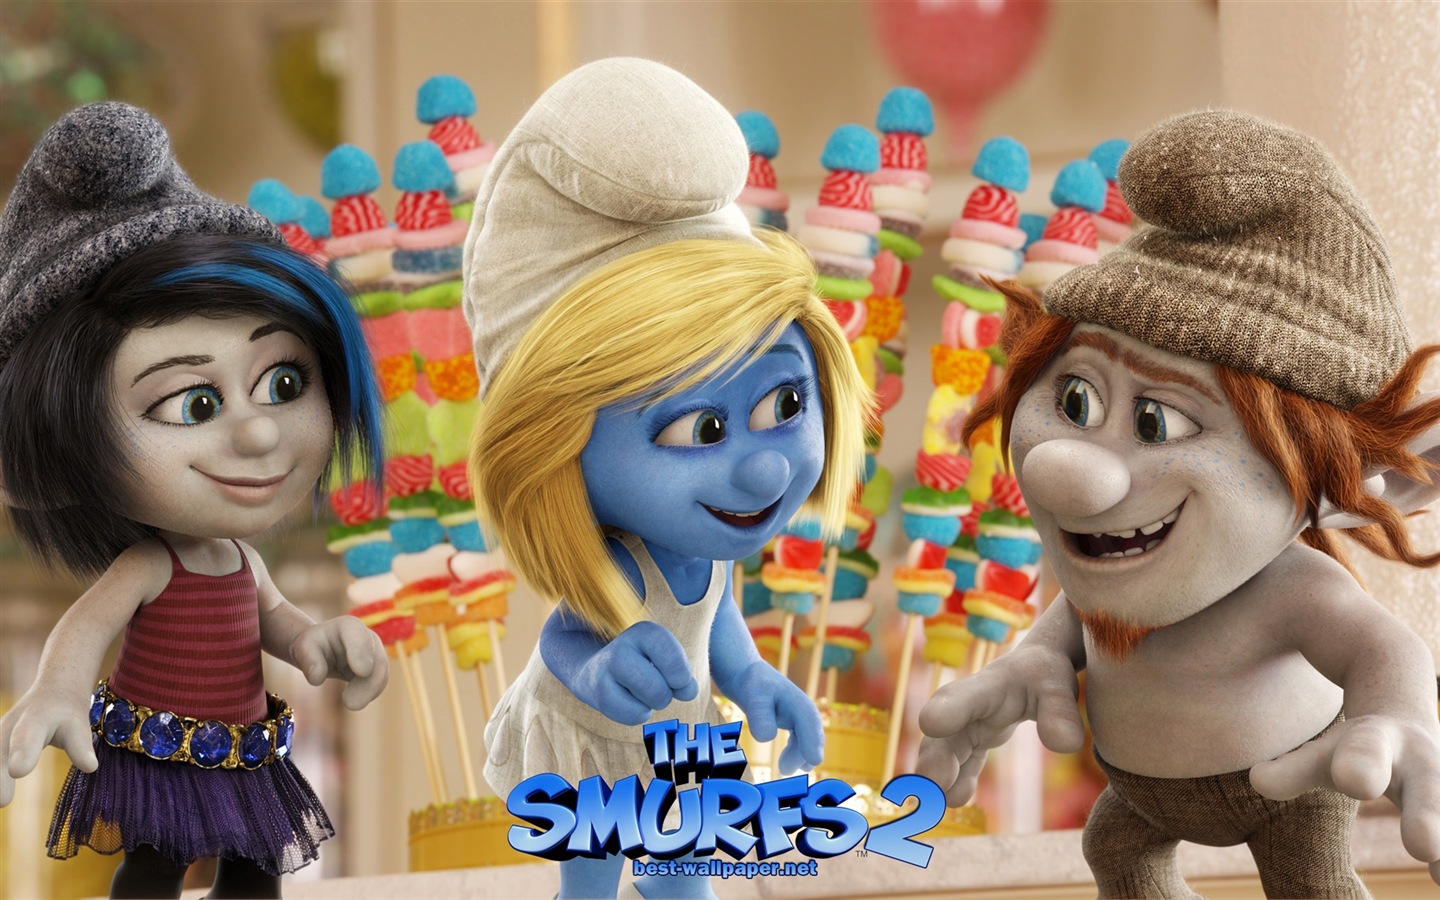 The Smurfs 2 HD movie wallpapers #5 - 1440x900